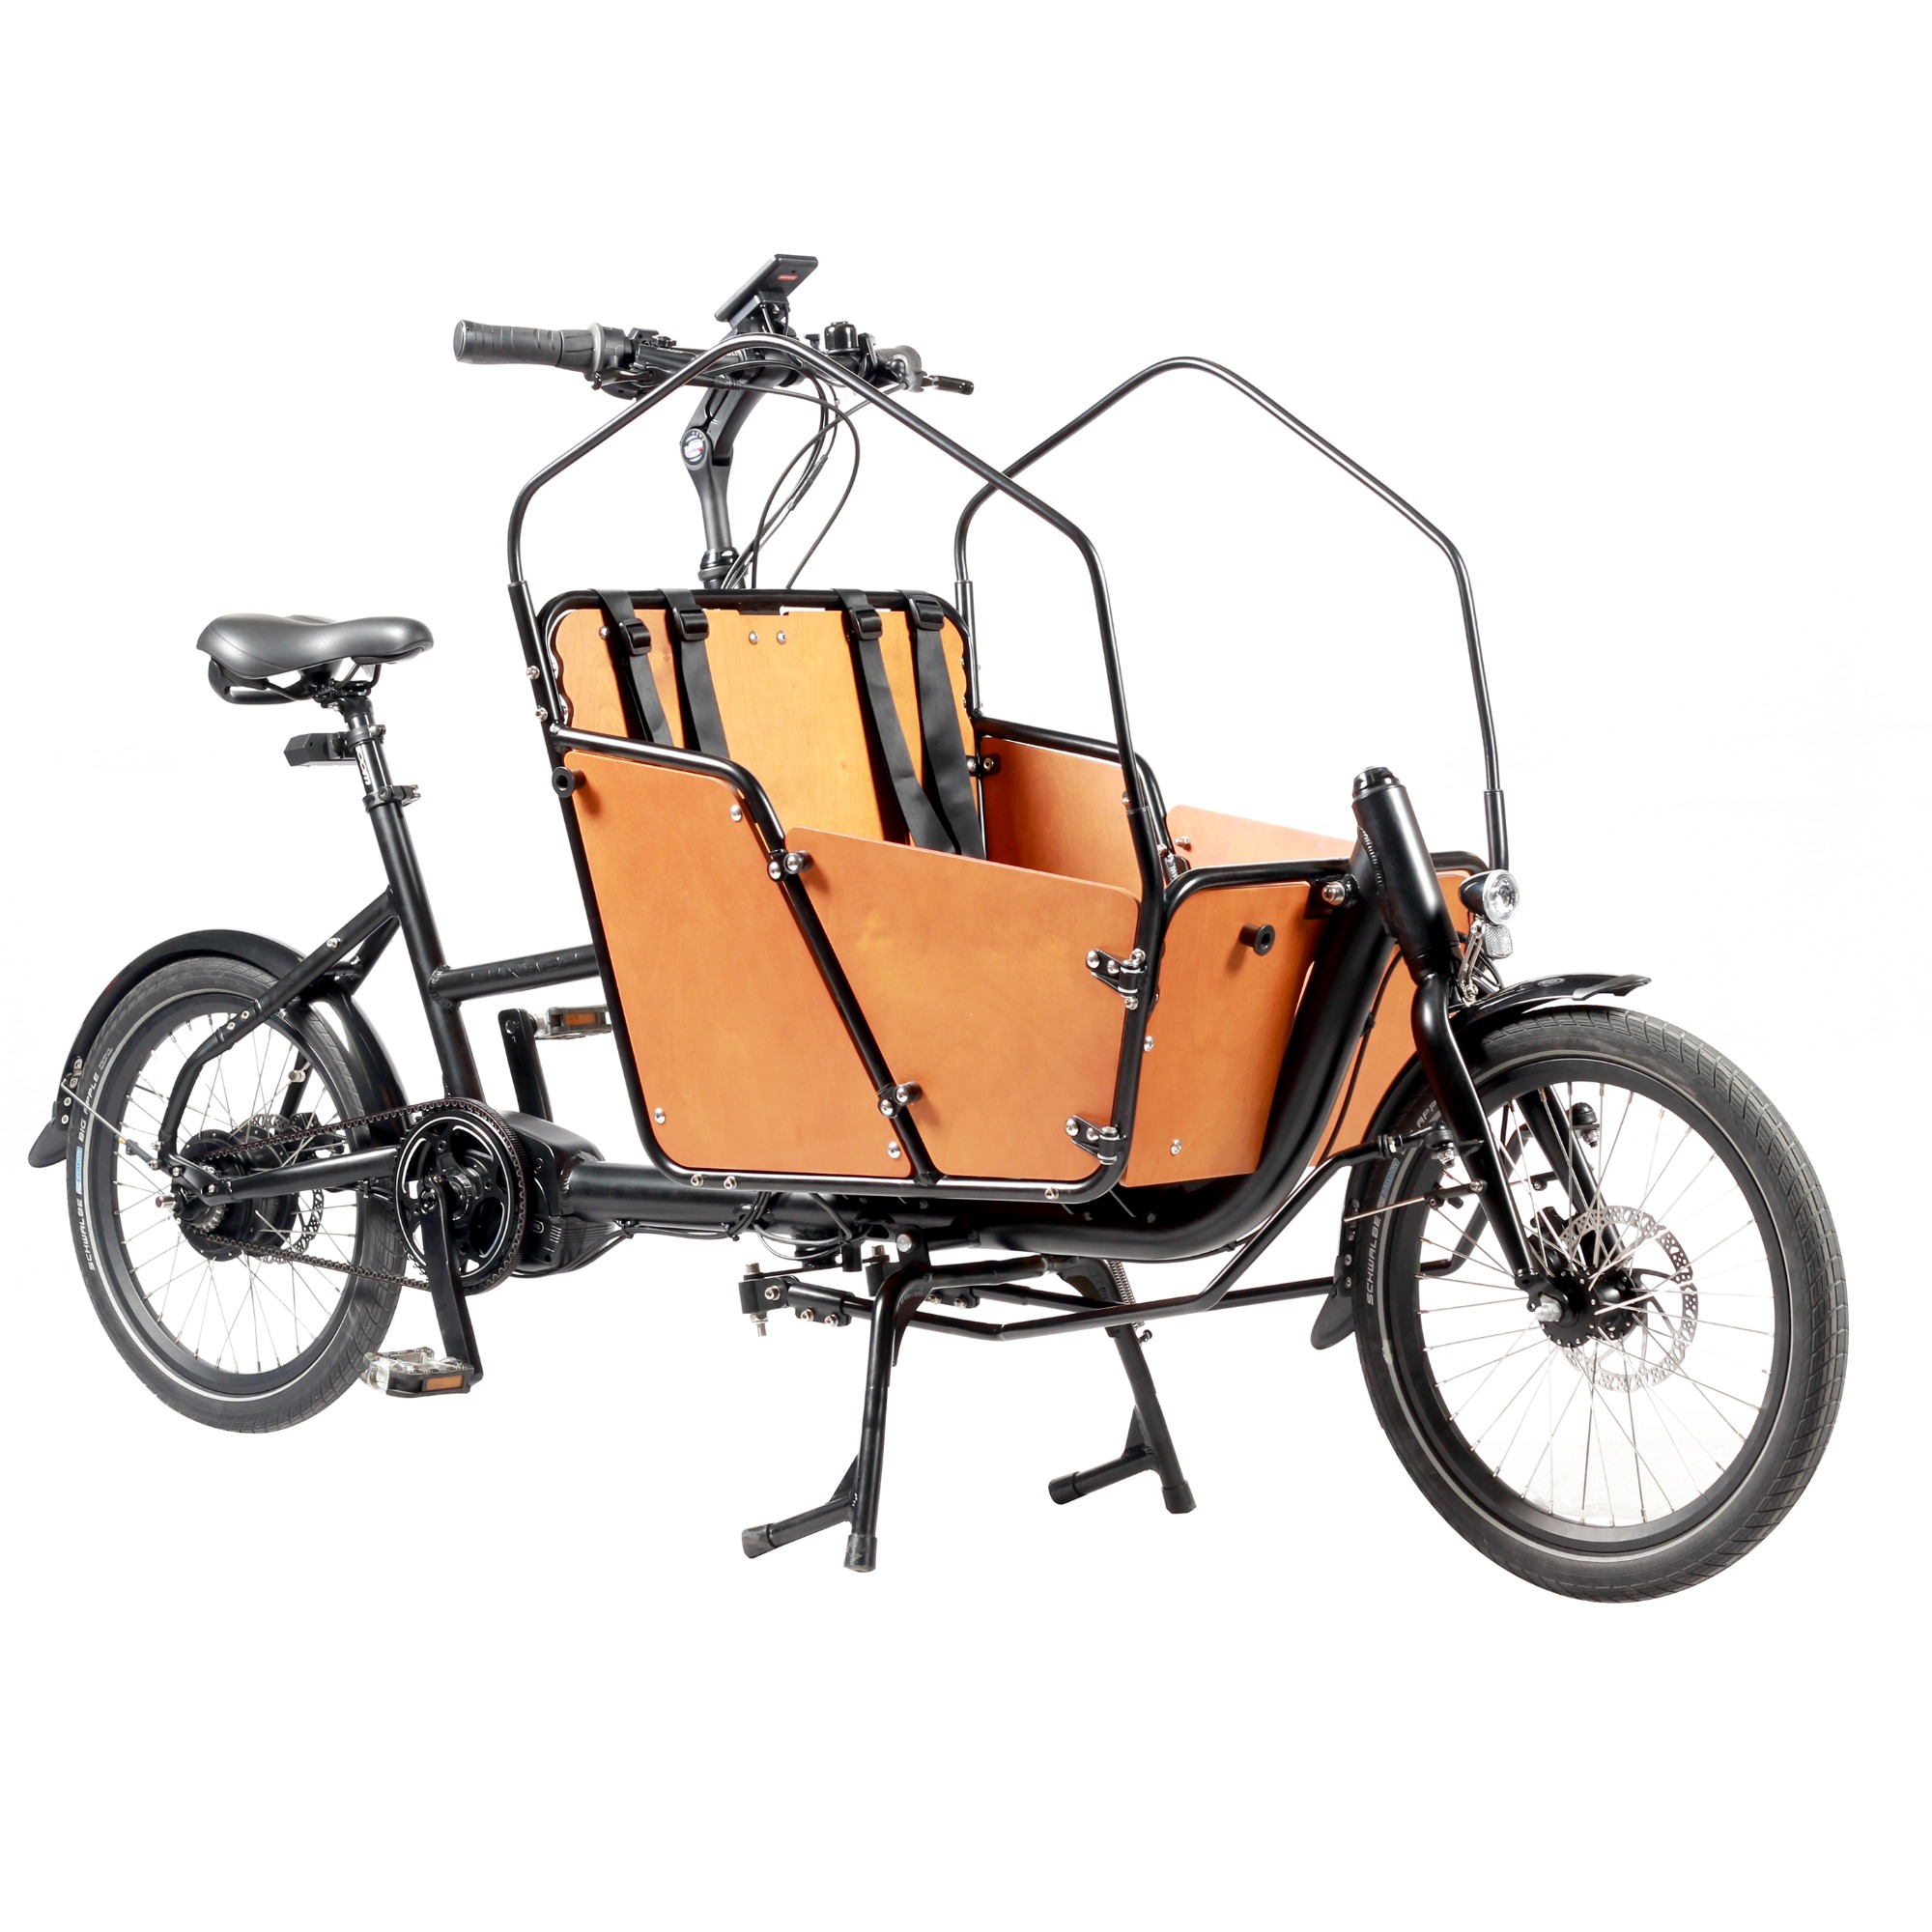 Differences between electric cargo bikes with a rear wheel motor and cargo bikes with a mid-drive motor